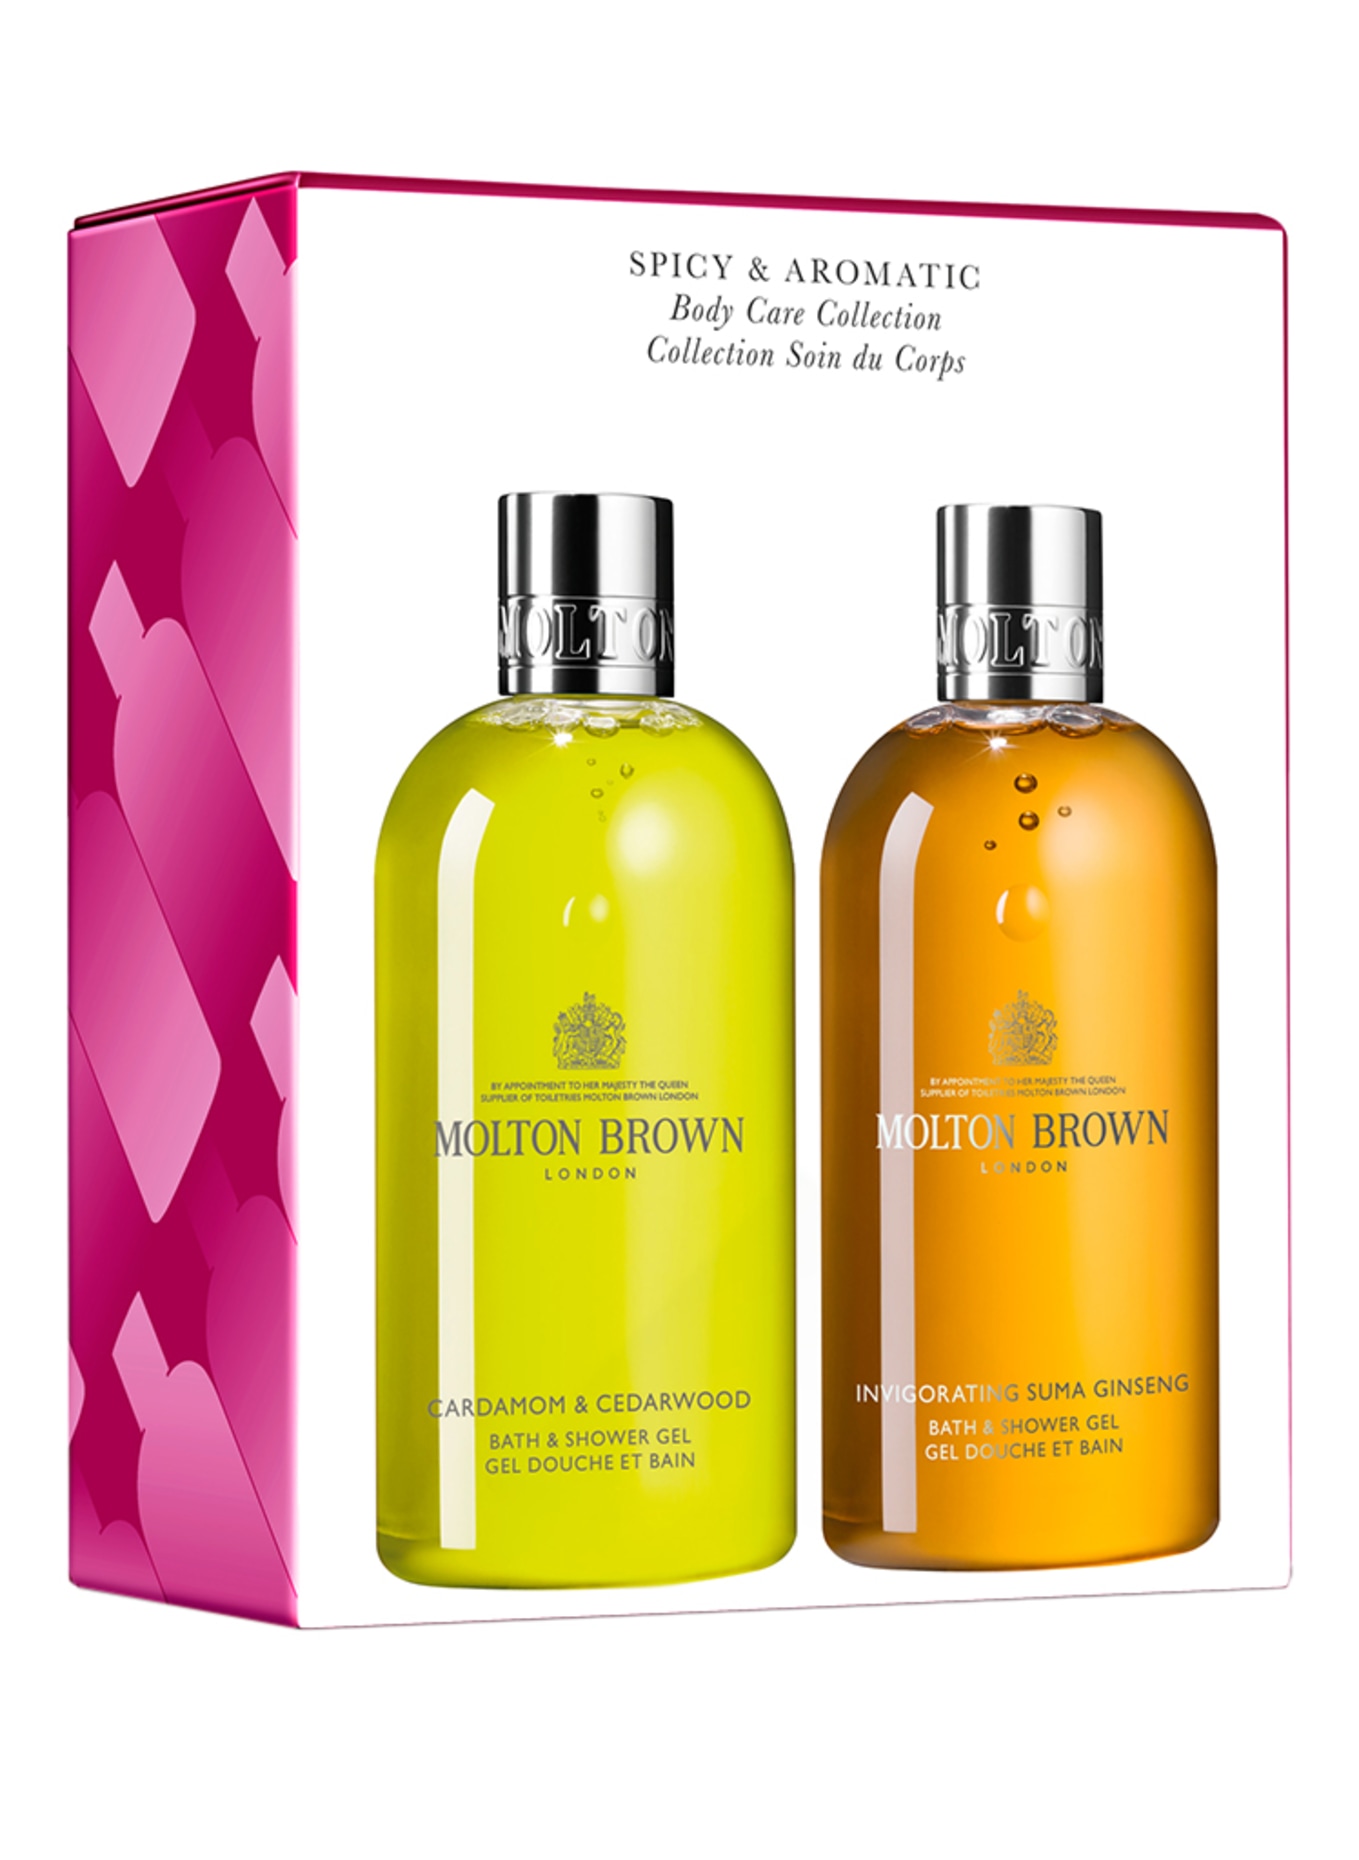 MOLTON BROWN SPICY & AROMATIC BODY CARE COLLECTION (Obrazek 1)